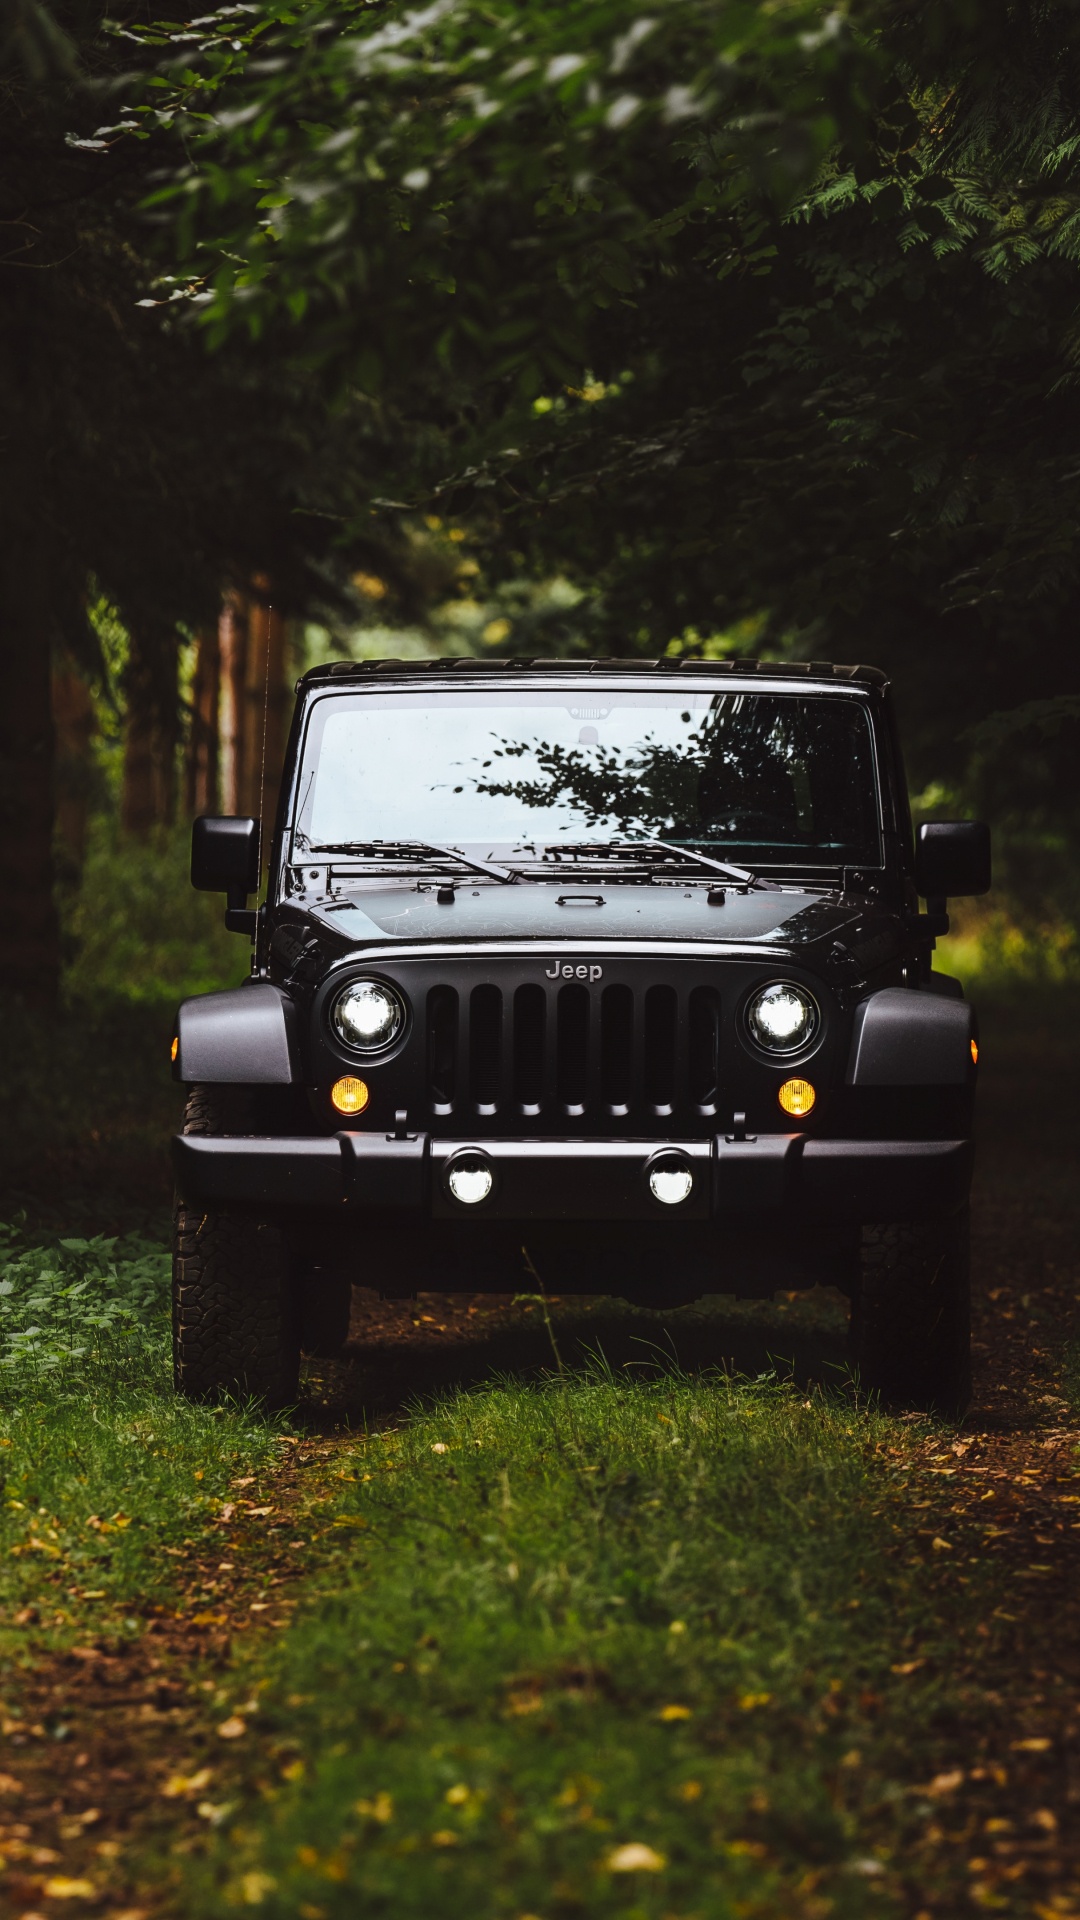 Black Jeep Wrangler on Green Grass Field Surrounded by Green Trees During Daytime. Wallpaper in 1080x1920 Resolution